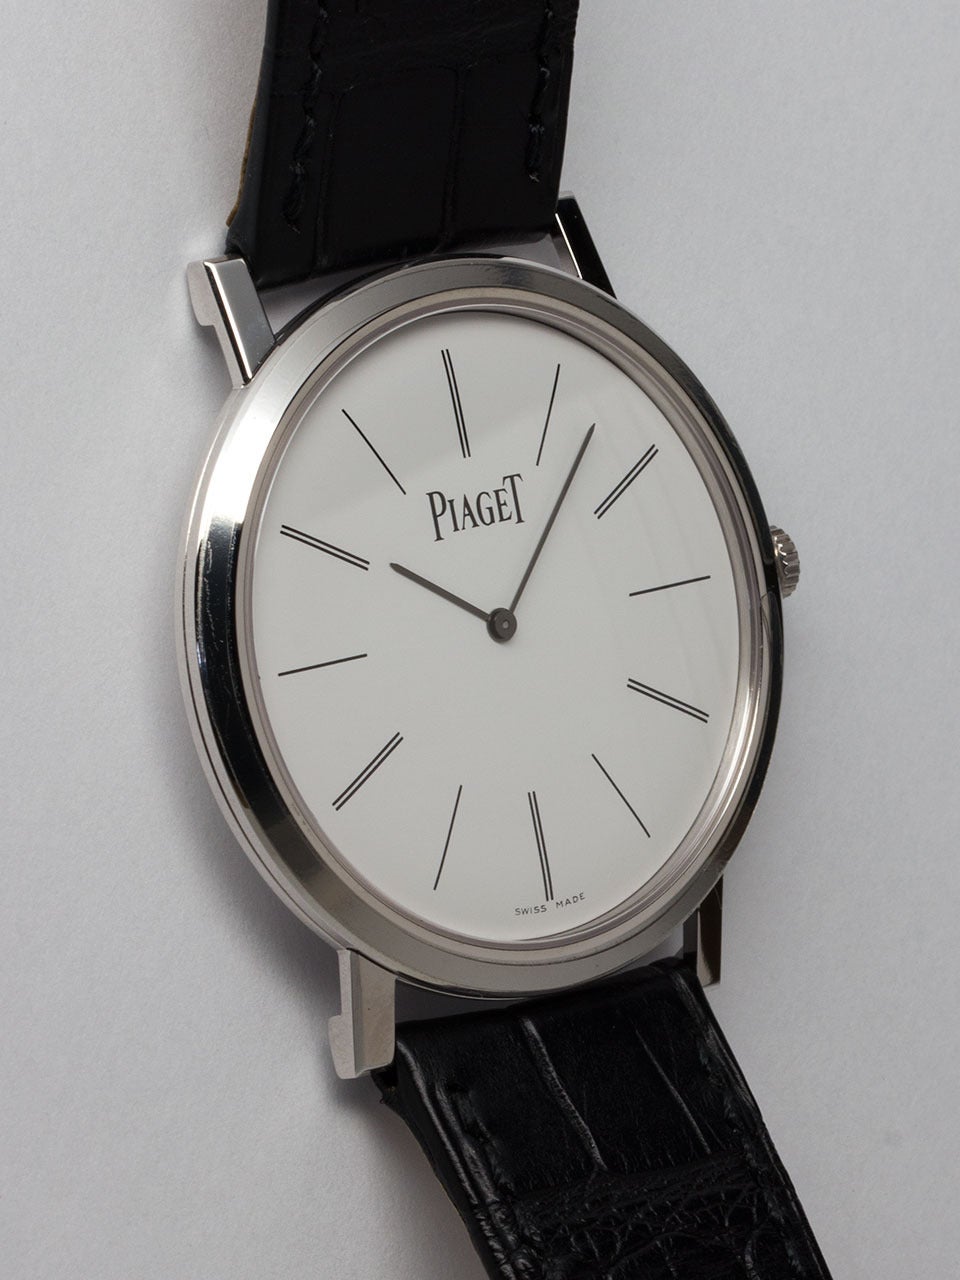 Piaget 18K White Gold Altiplano Wristwatch ref GOA29112 circa 2014. 38mm diameter ultra thin case. Featuring matte white dial with elegant and slim indexes. Powered by 18 jewel manual wind caliber 430P movement with 40 hour power reserve. Original